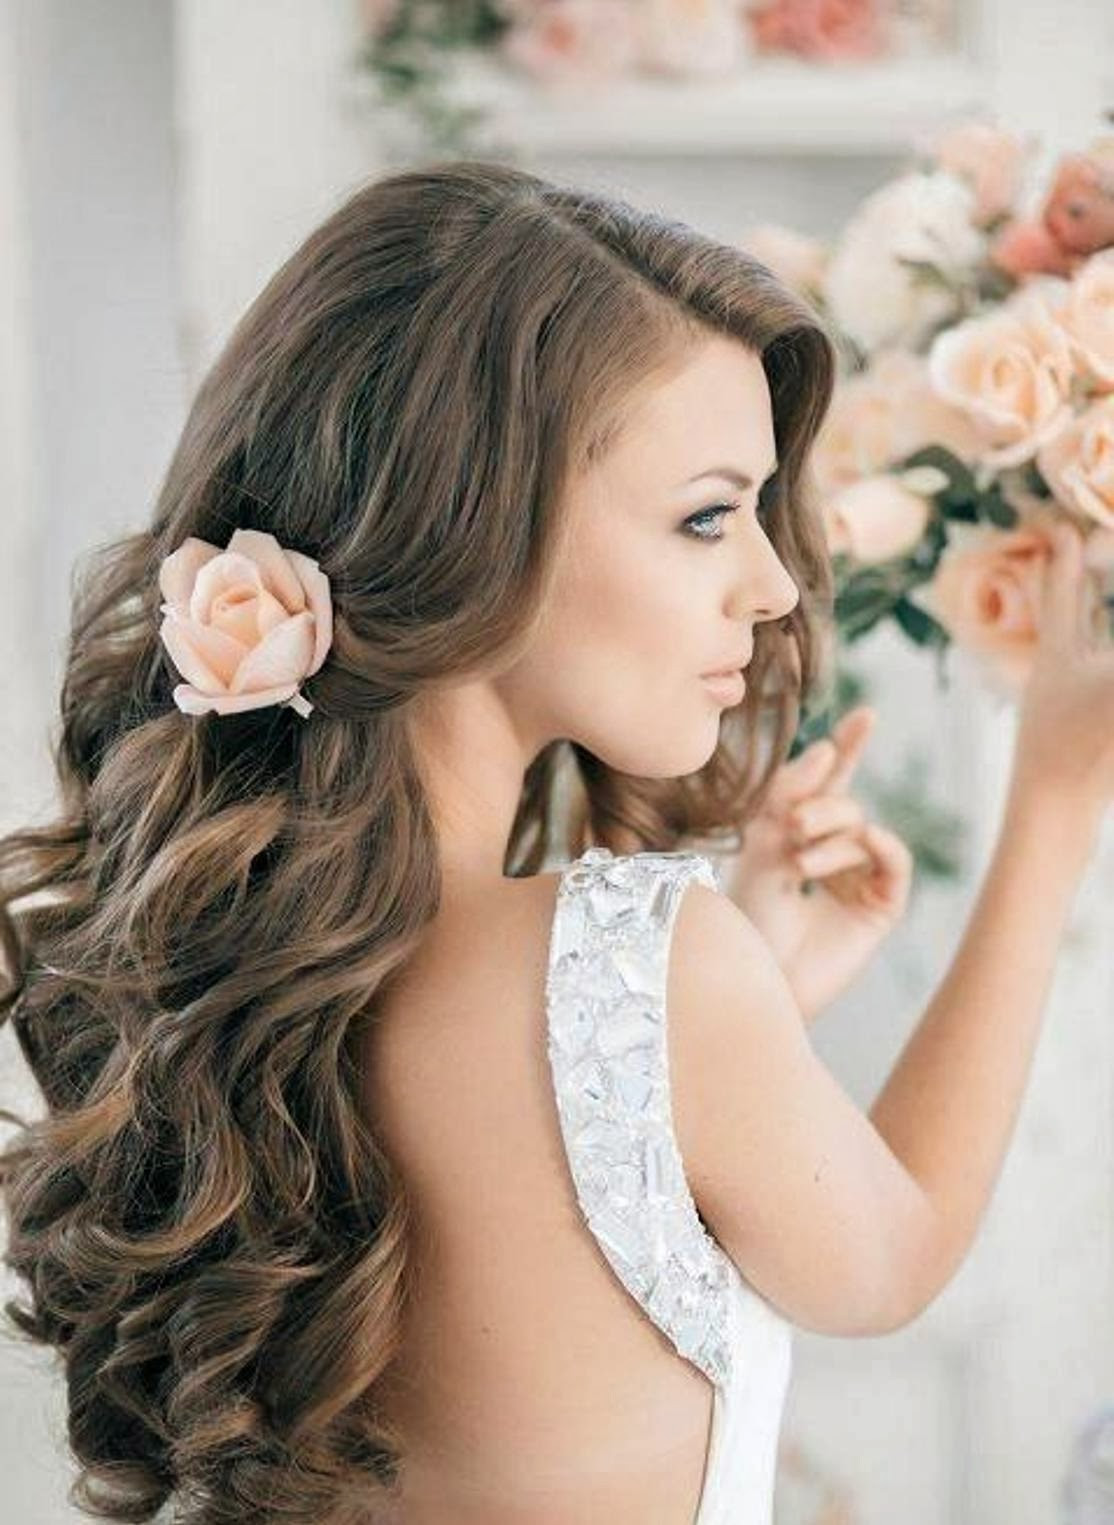 Hairstyles For Weddings
 Best hairstyles for long hair wedding Hair Fashion Style